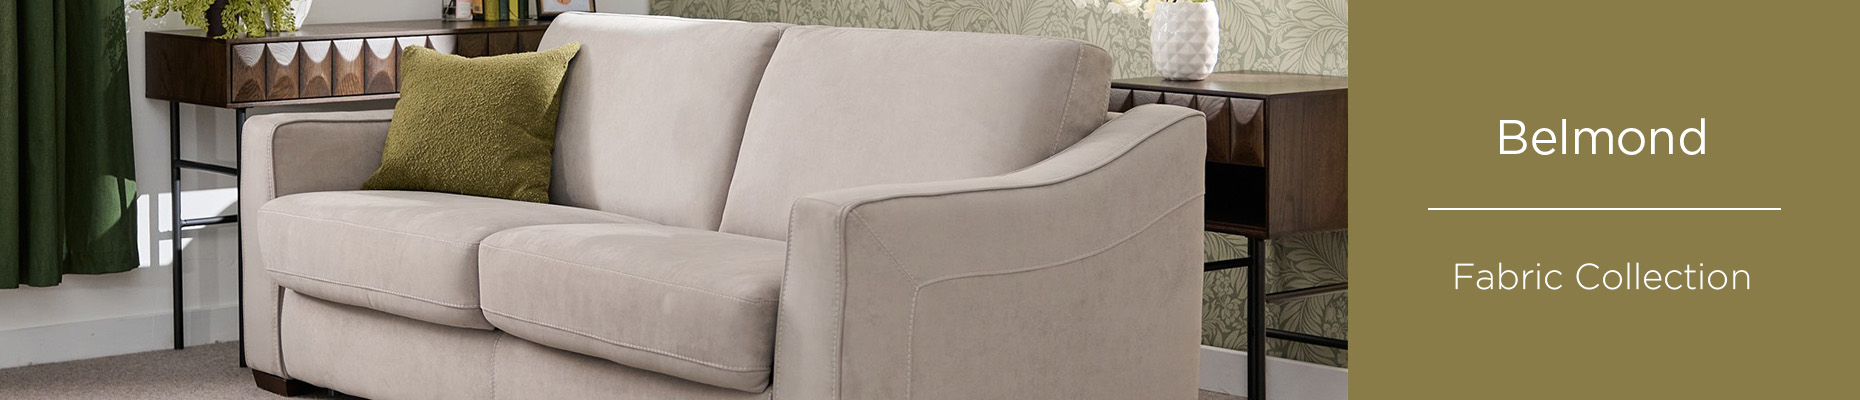 Barra sofa collection at Forrest Furnishing